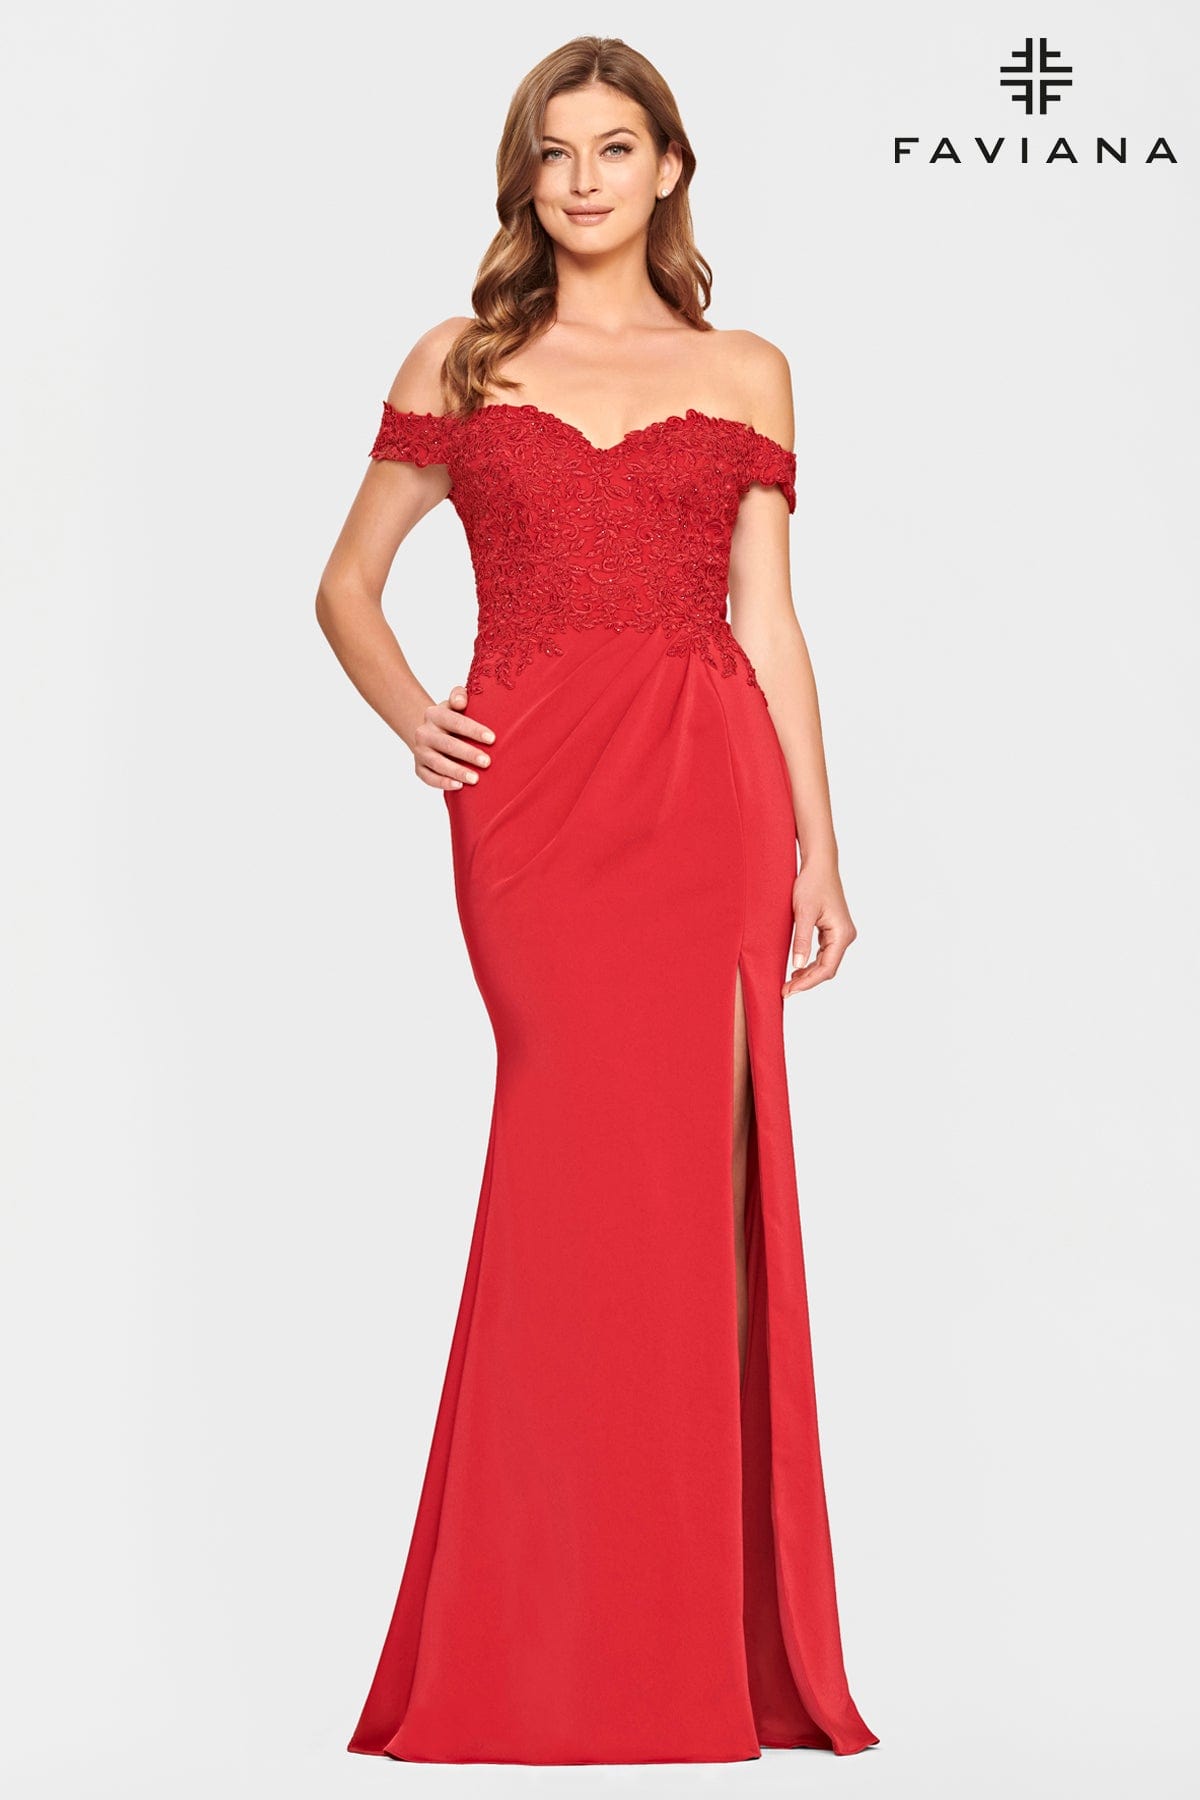 Long Strapless Dress With Lace Applique Bodice And Pleated Skirt